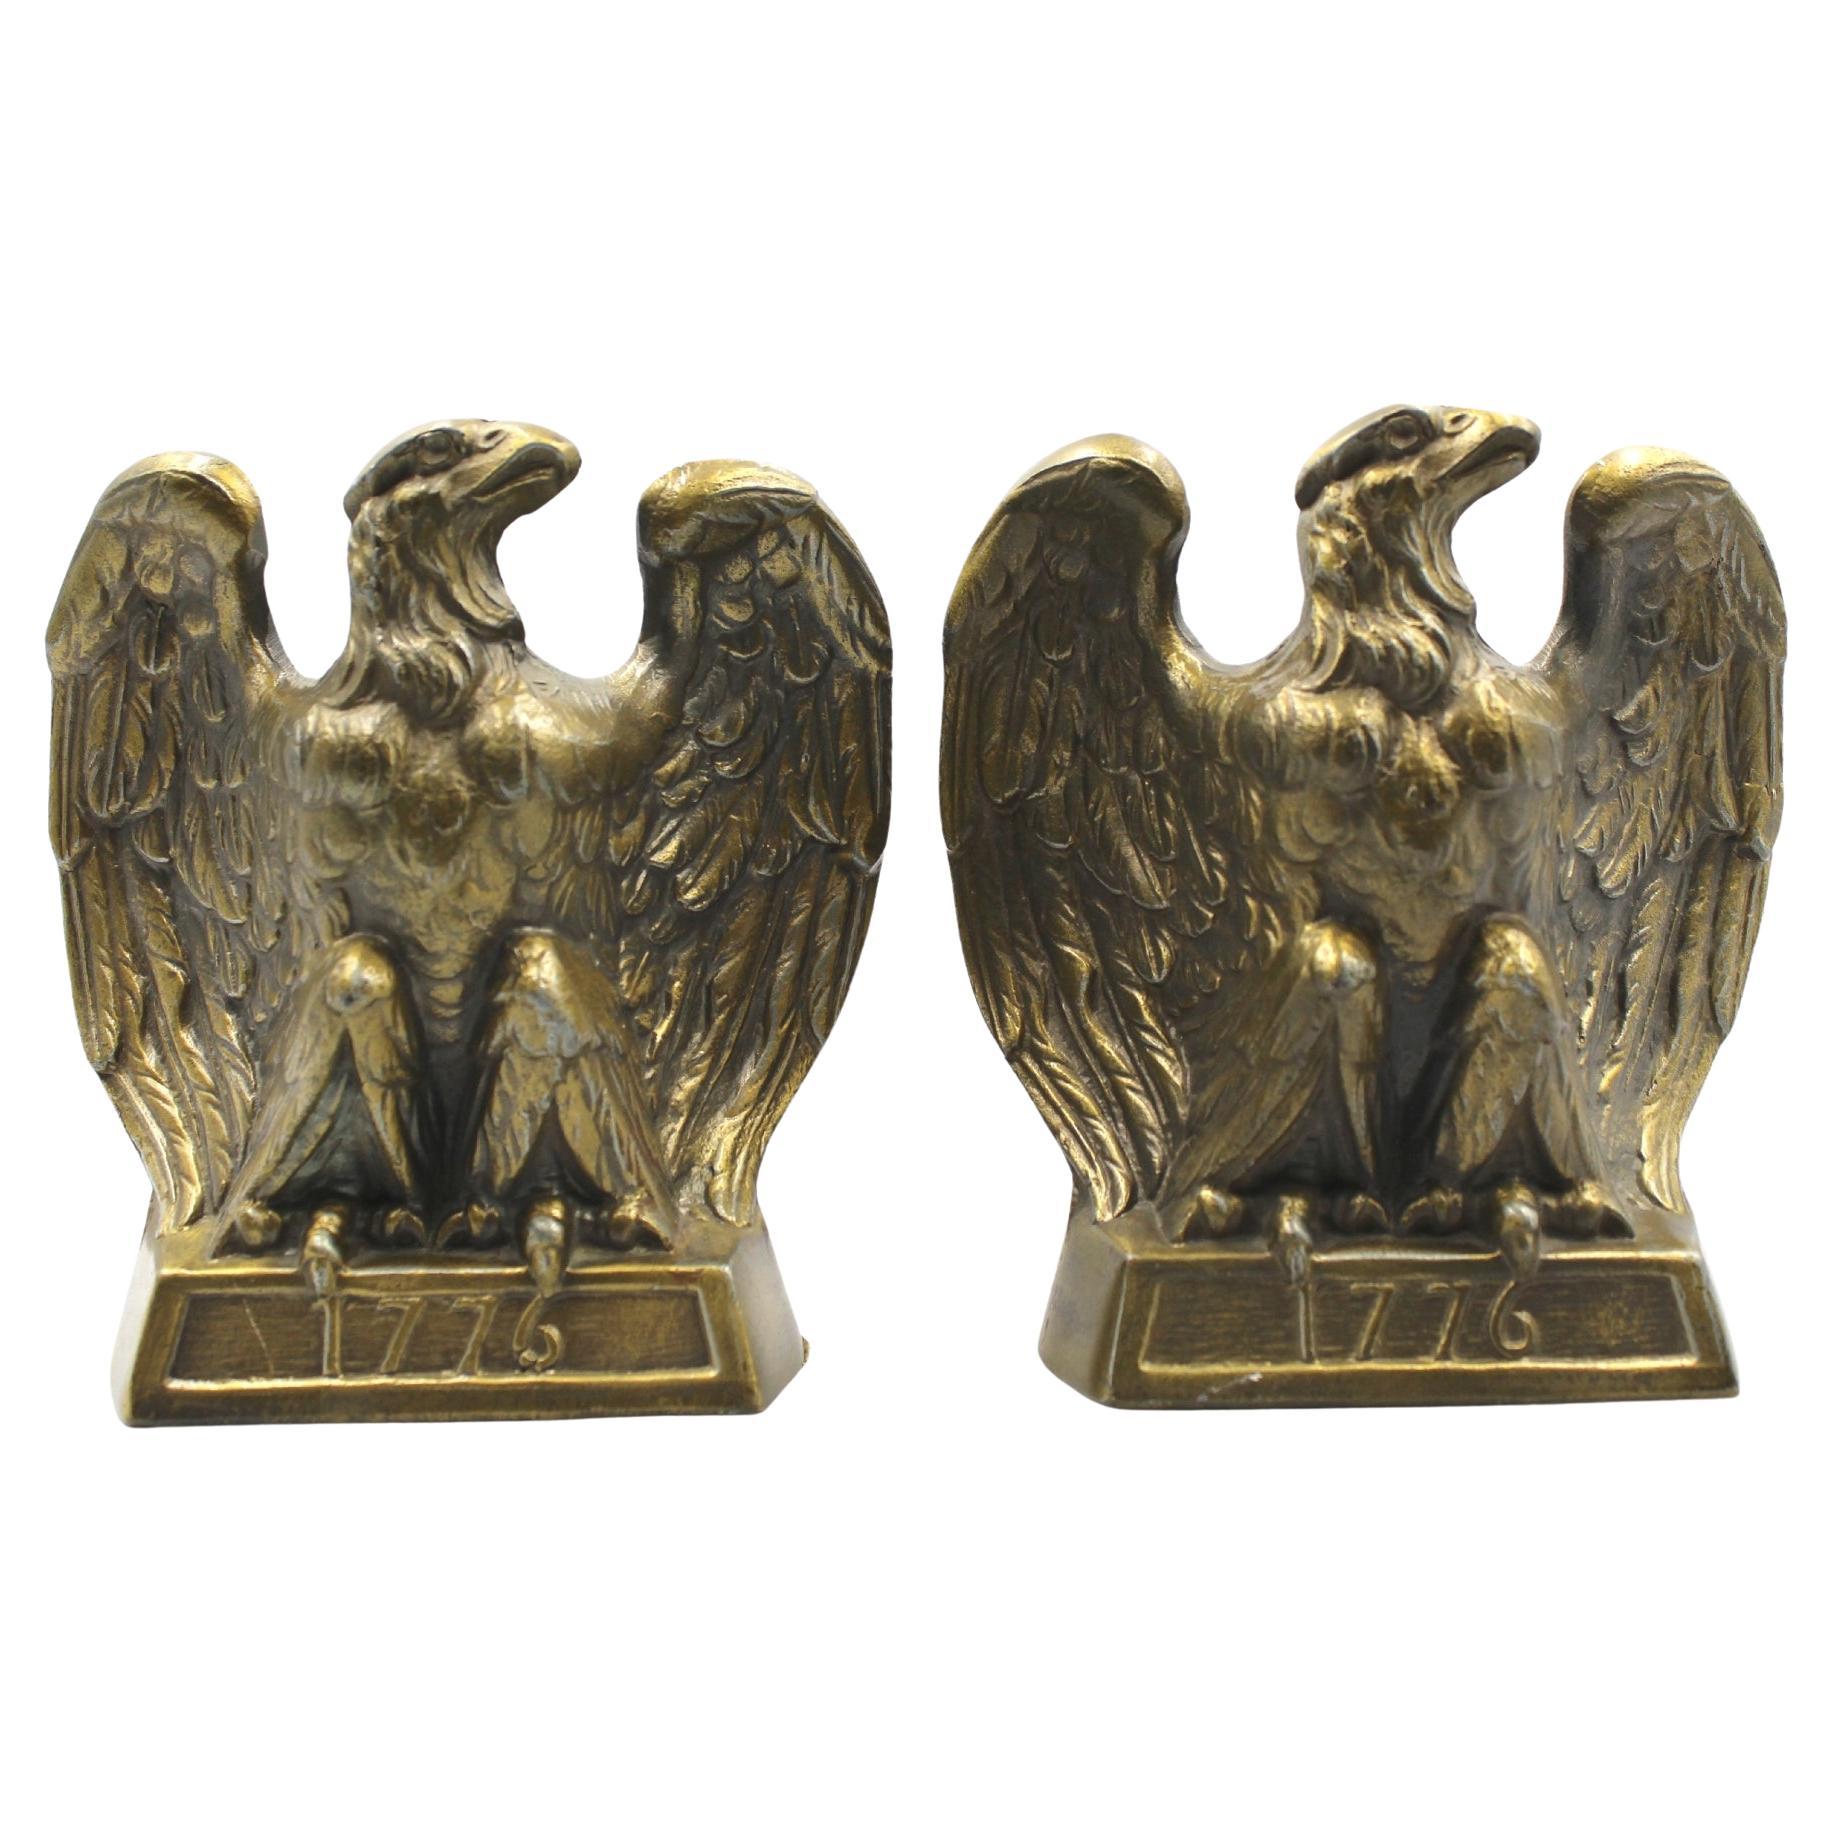 Vintage "1776" Brass American Eagle Bookends by Colonial Virginia